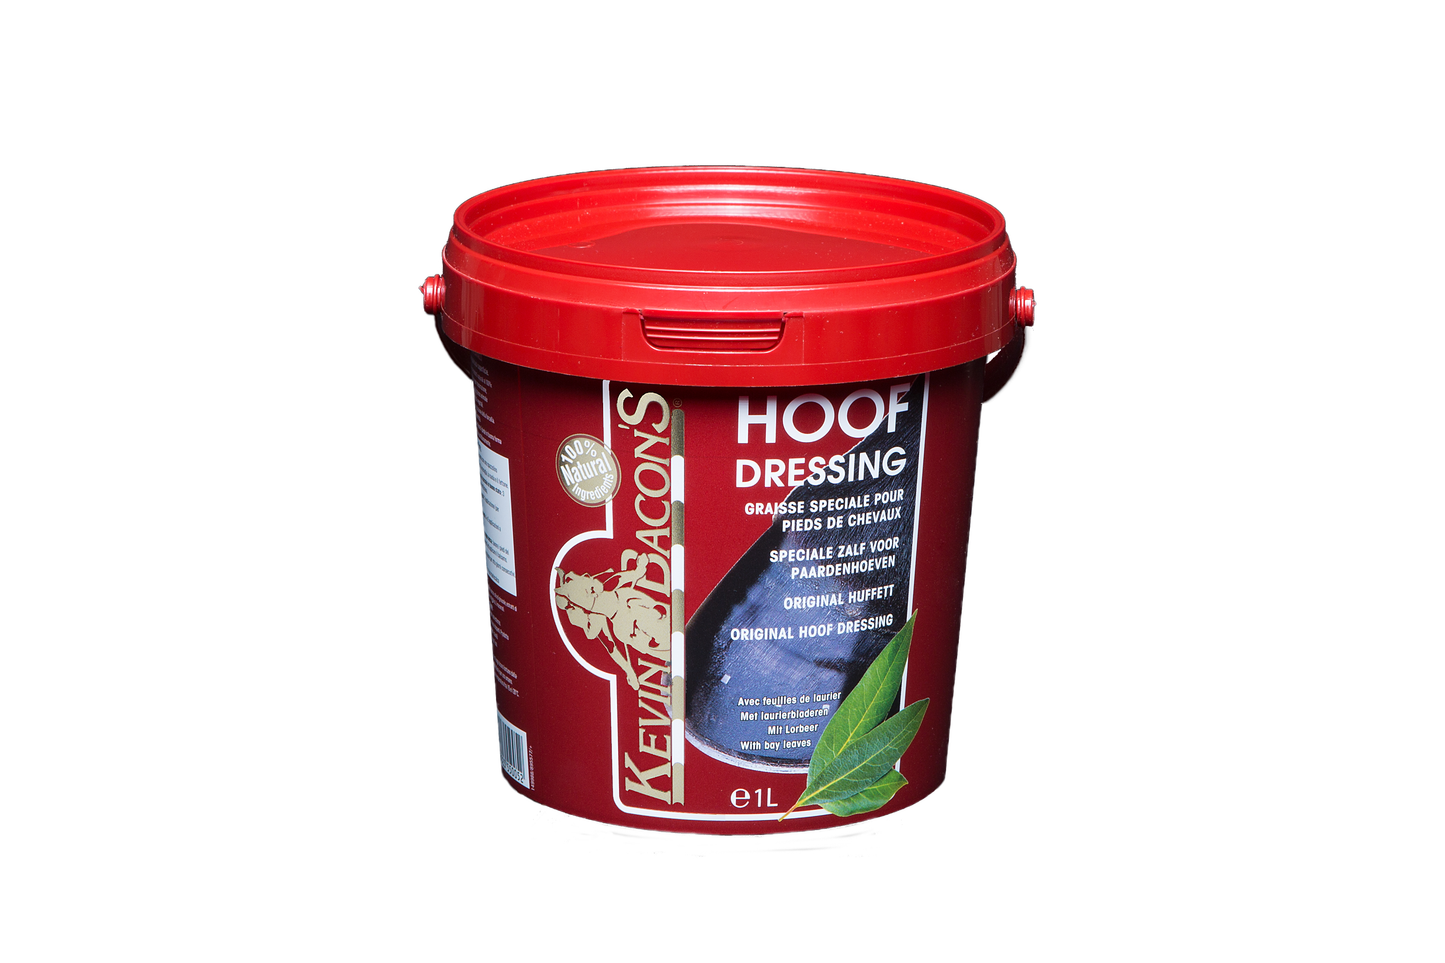 KEVIN BACON’S HOOF DRESSING